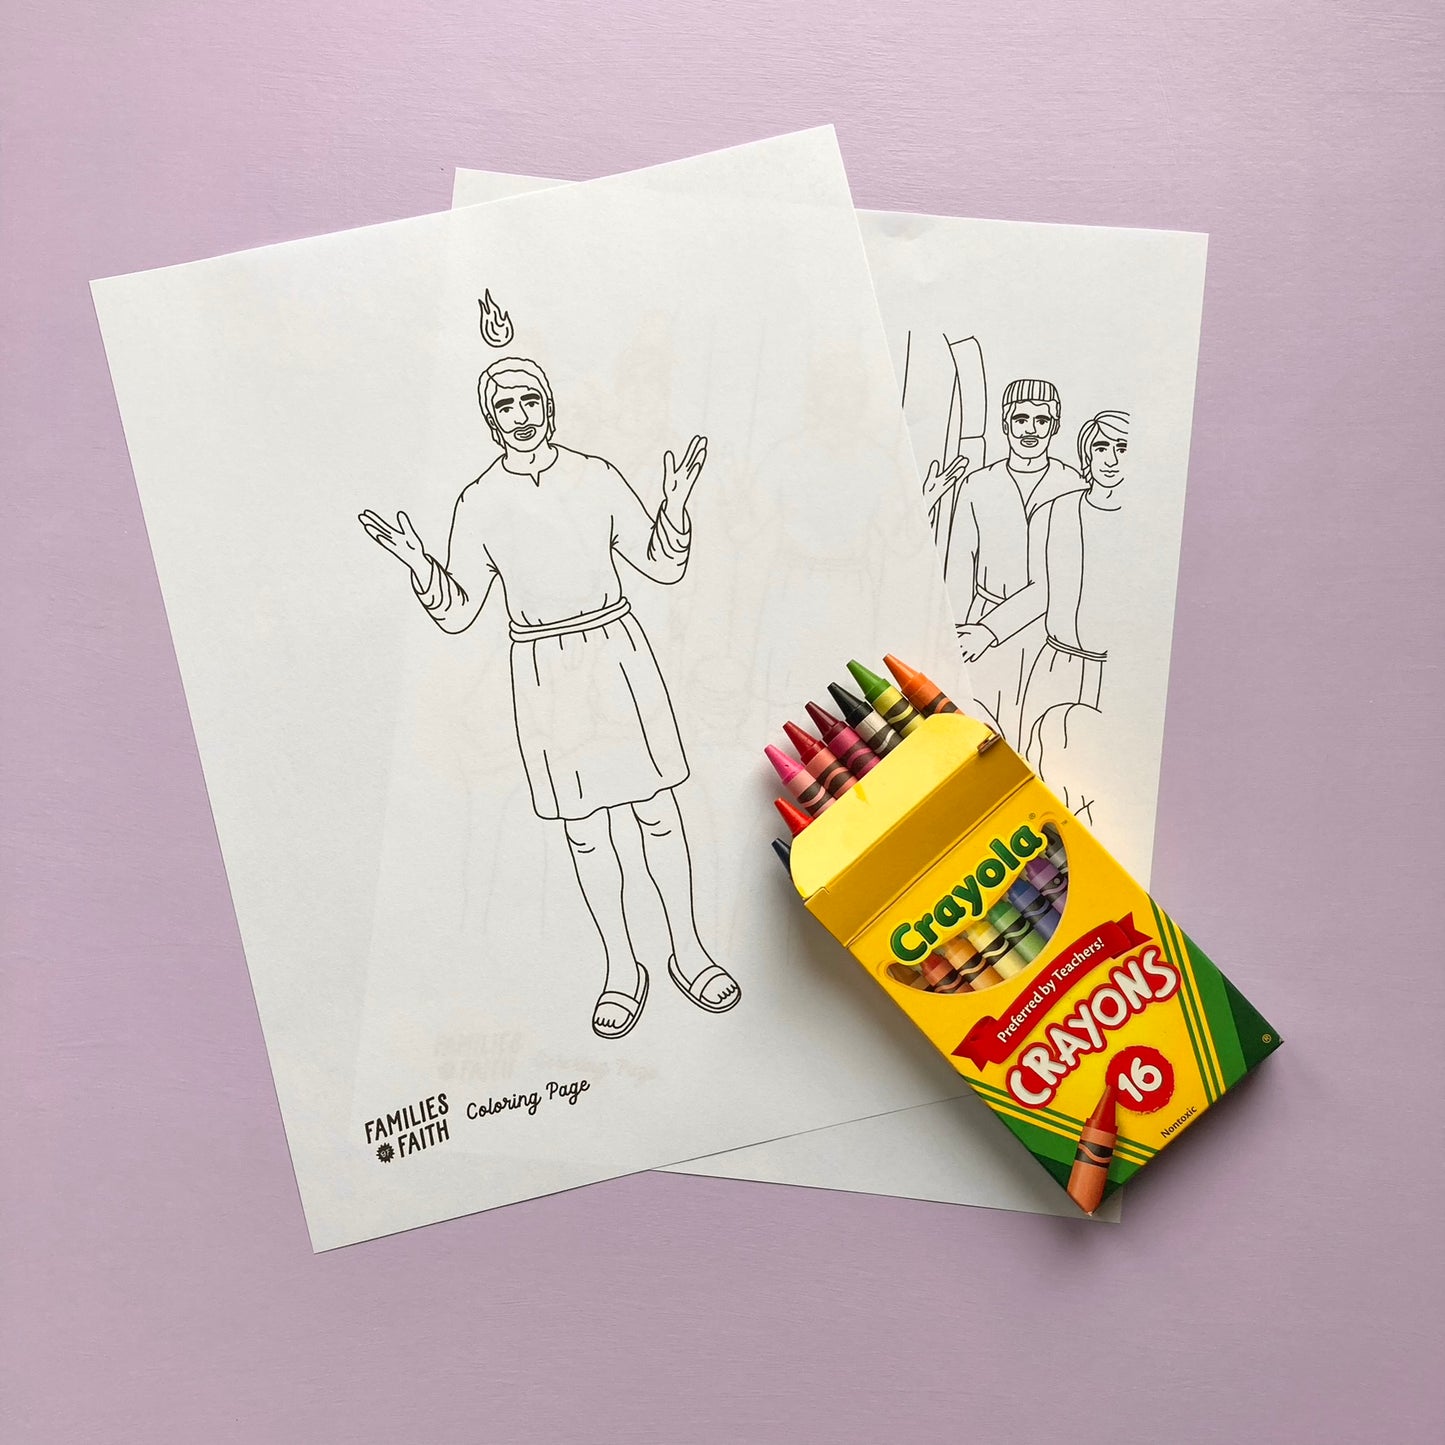 The Early Church Coloring Pages